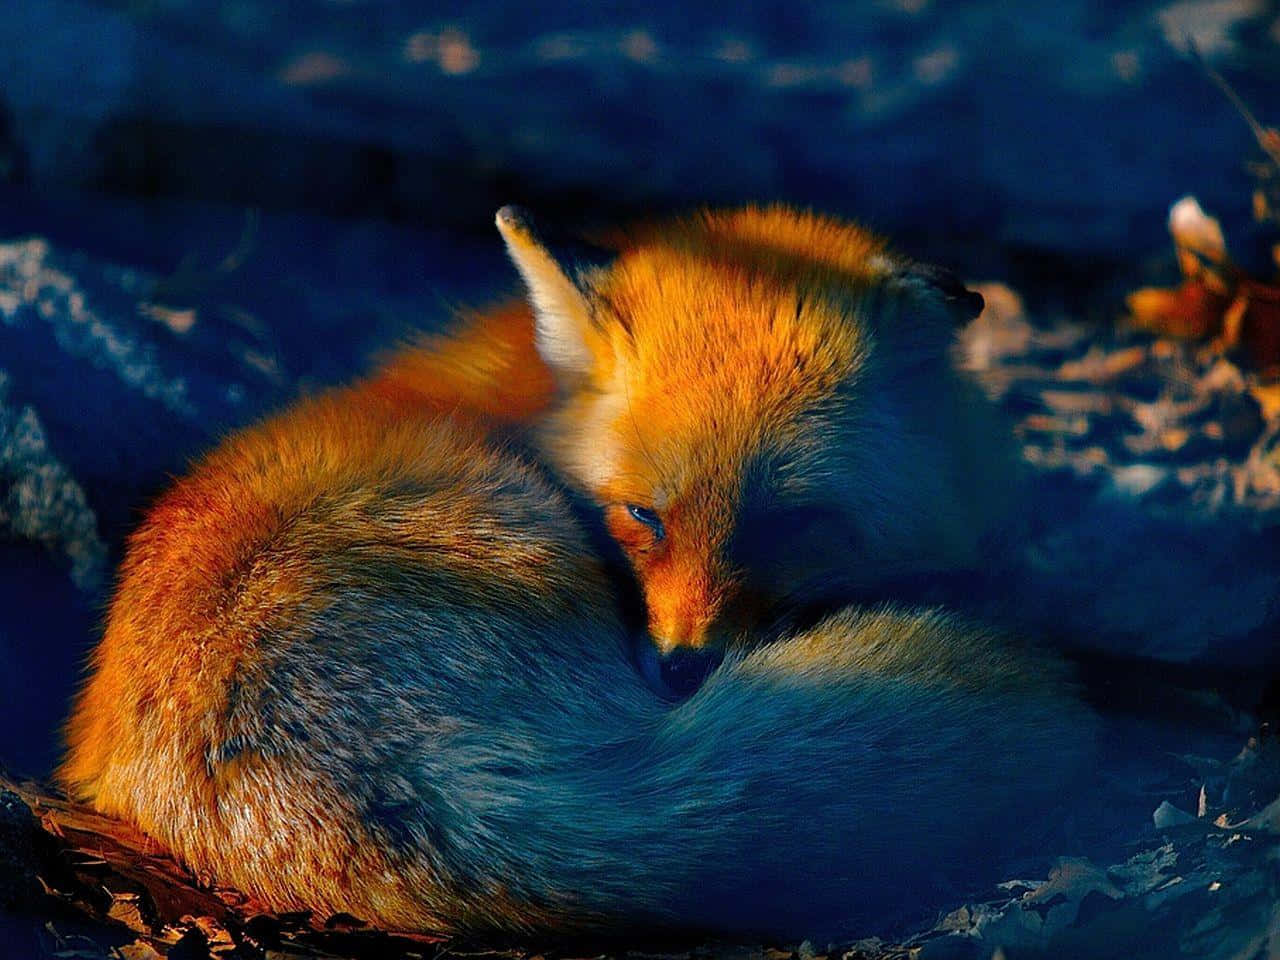 An Intriguingly Colorful Fox